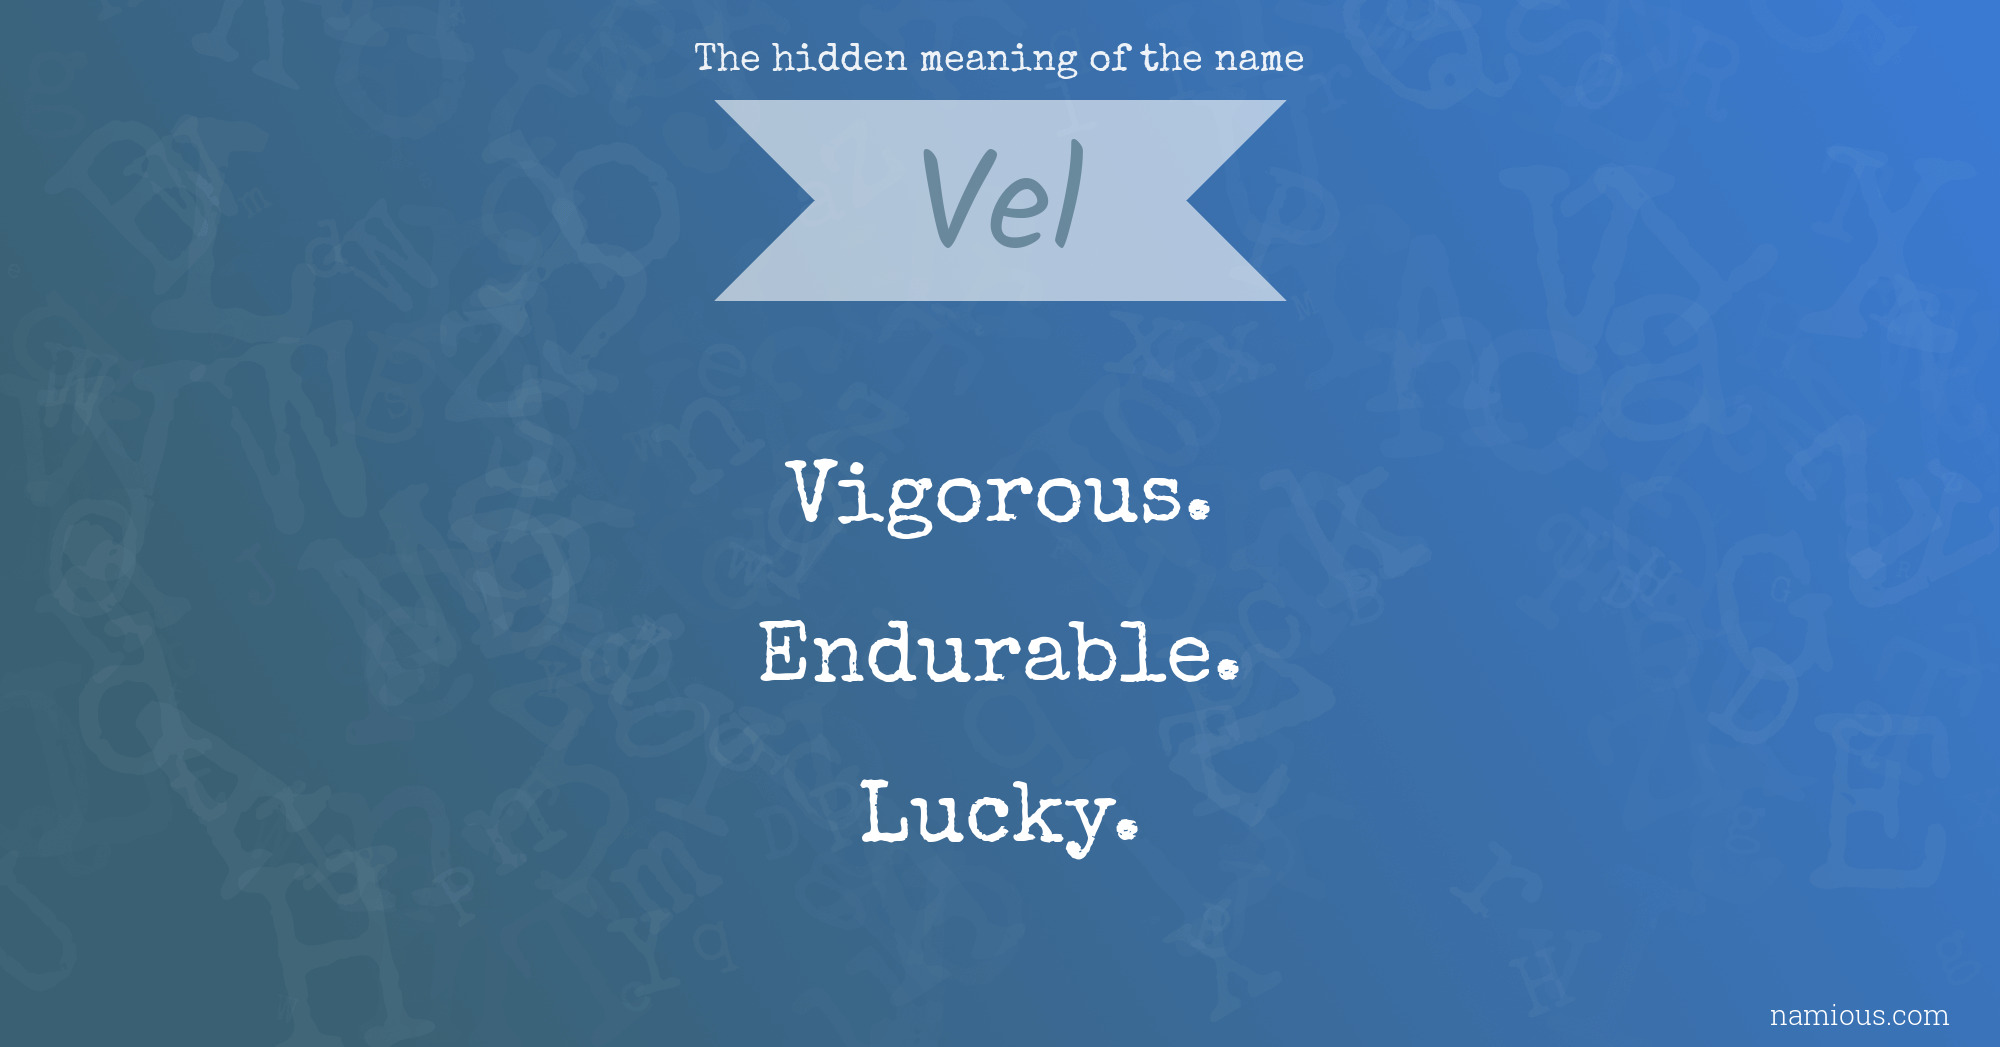 The hidden meaning of the name Vel